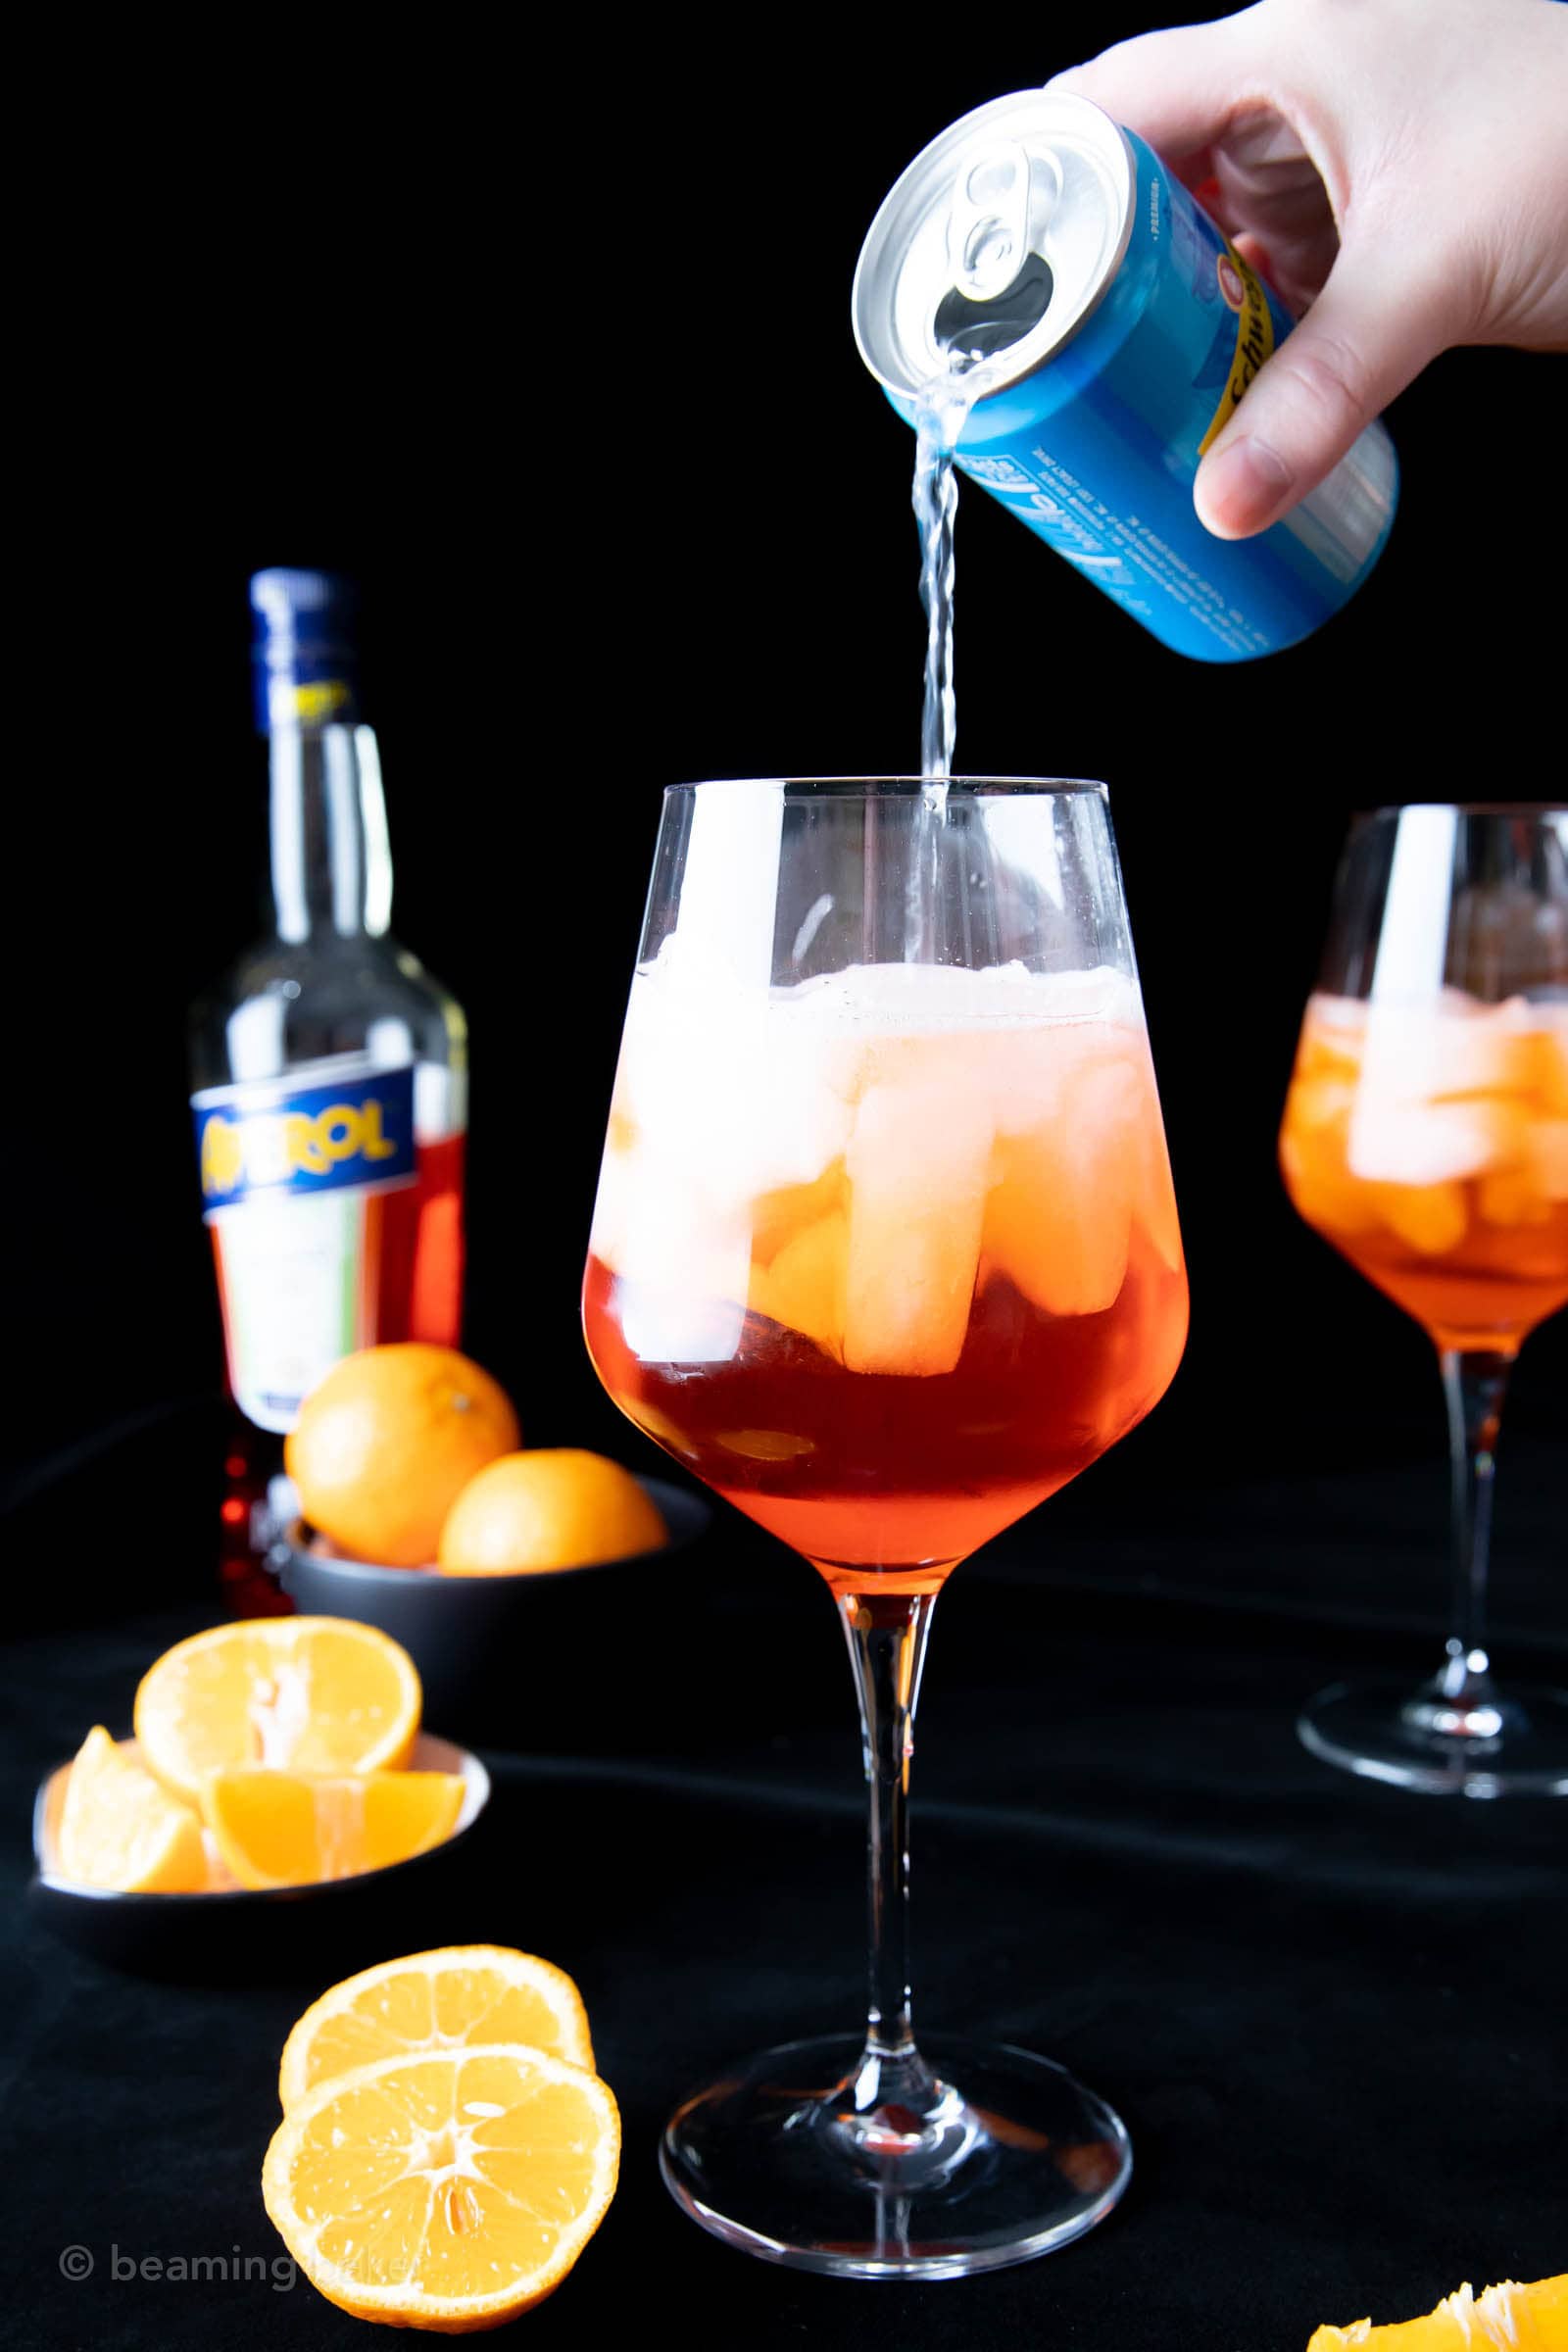 hand pouring a can of club soda over the Aperol into the wine glass